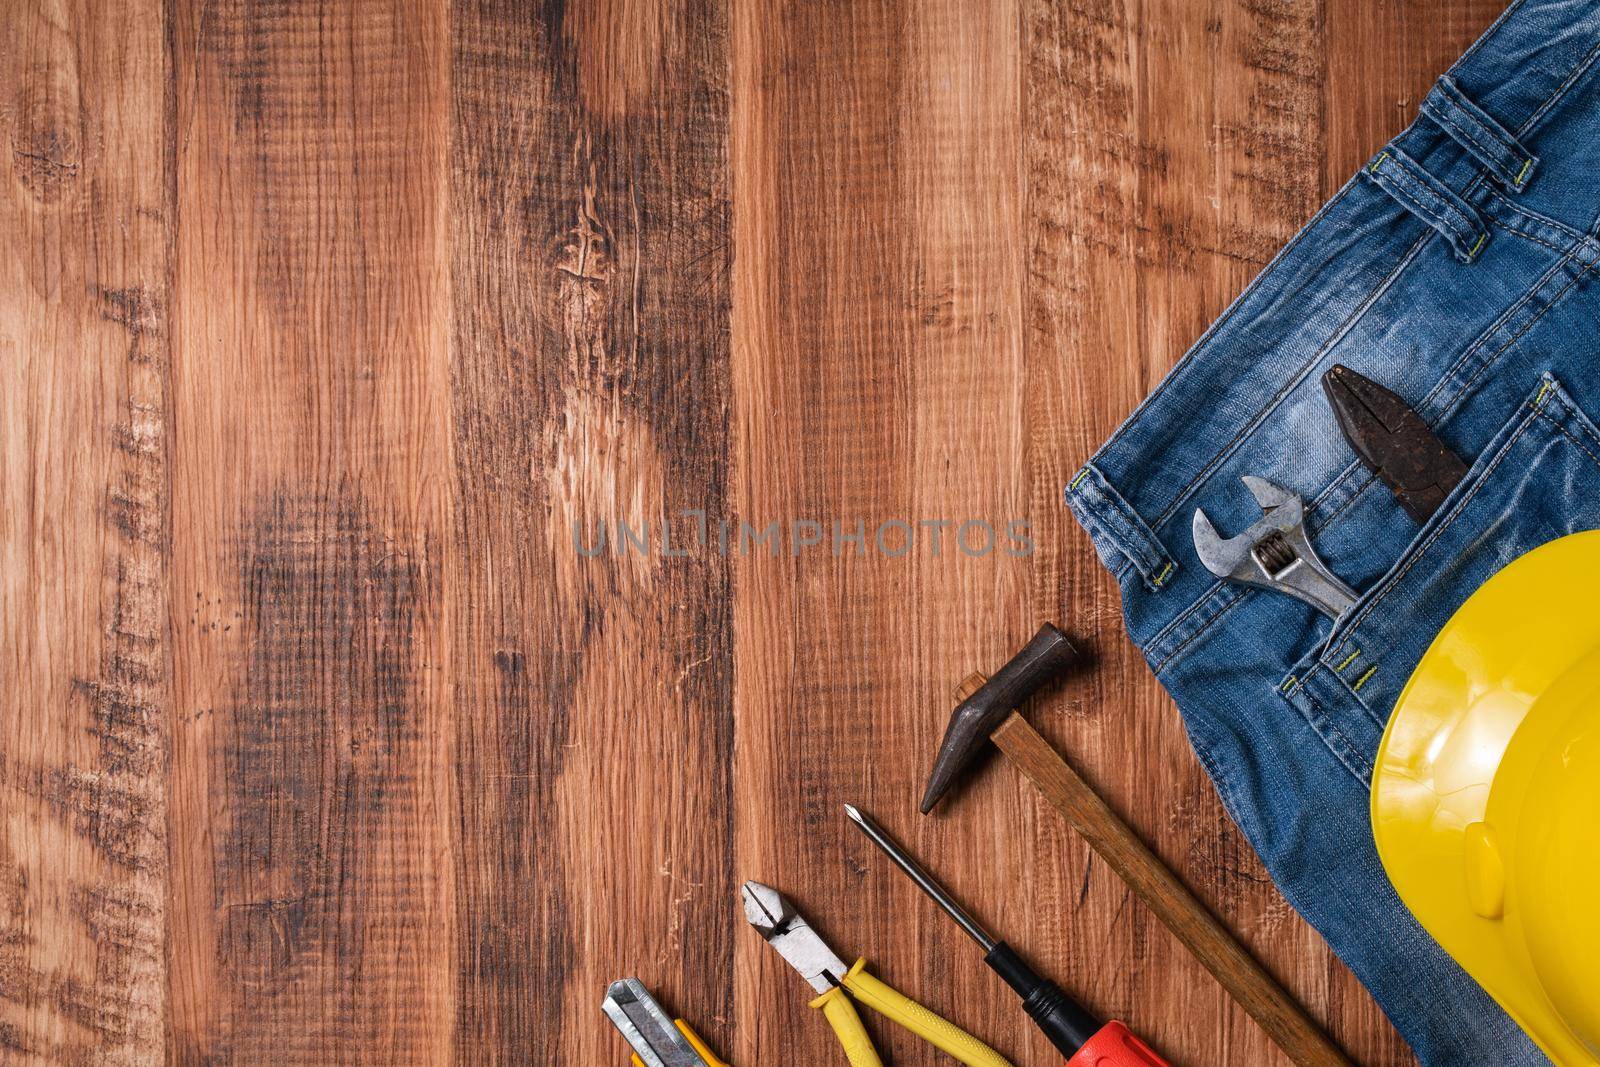 Top view design concept of Labor Day with working tools and jeans on wooden table background.